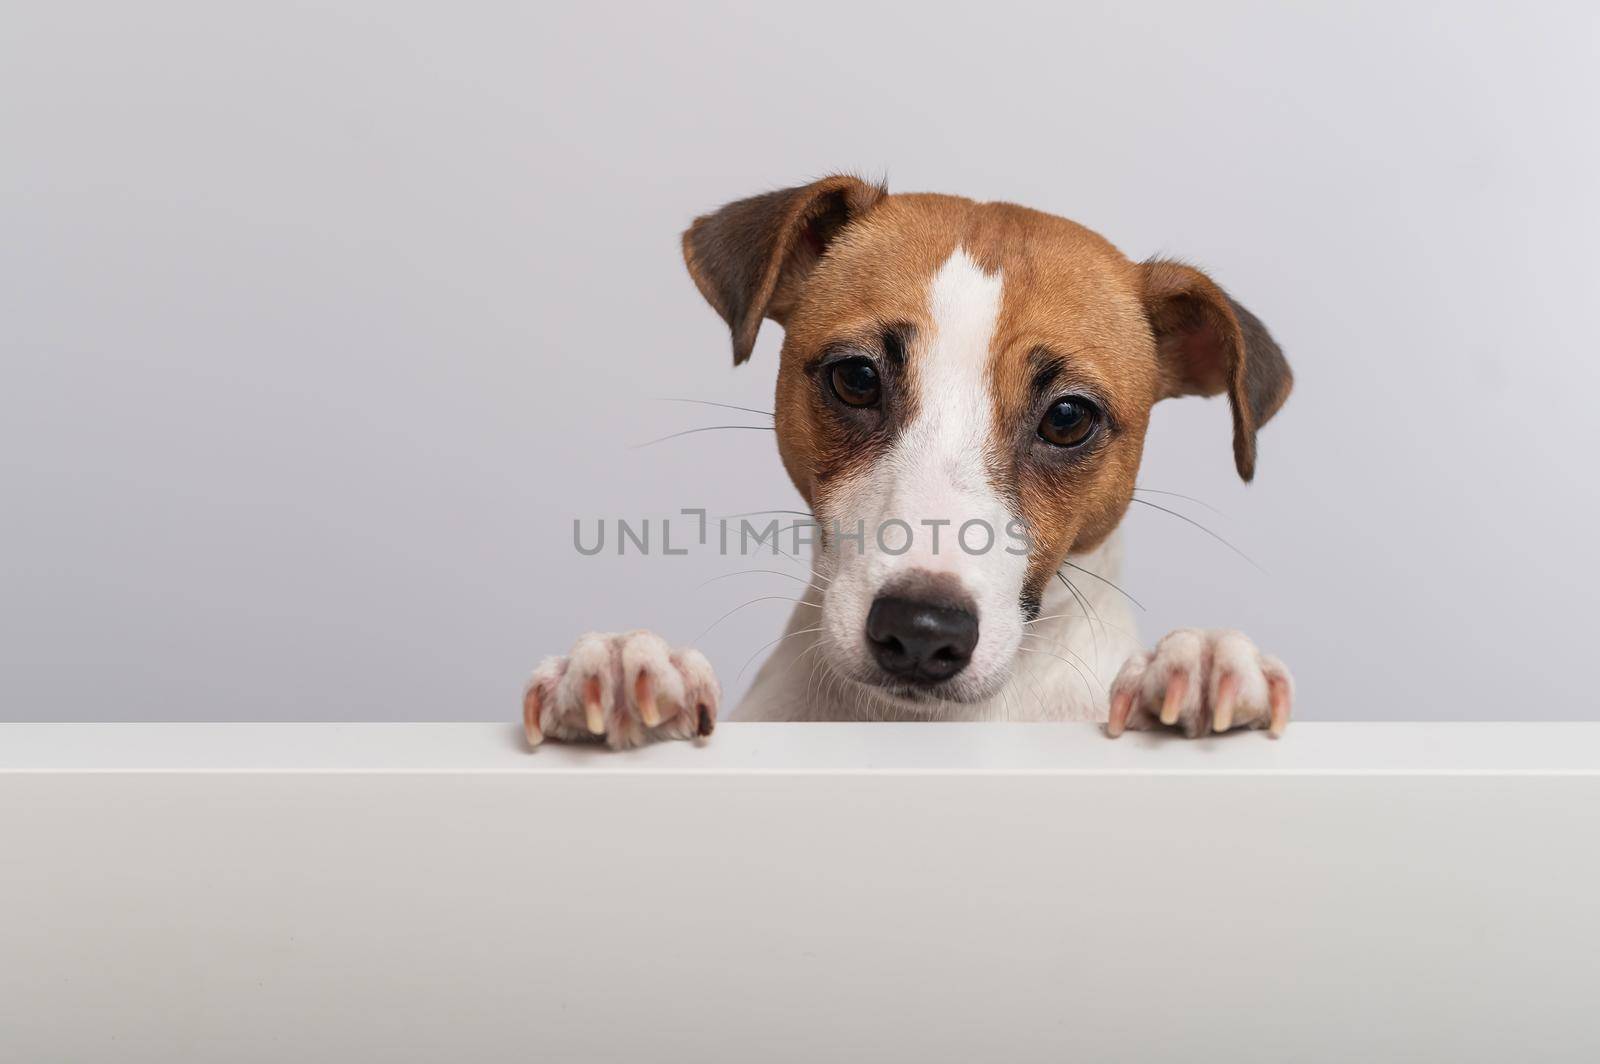 Gorgeous purebred Jack Russell Terrier dog peeking out from behind a banner on a white background. Copy space by mrwed54